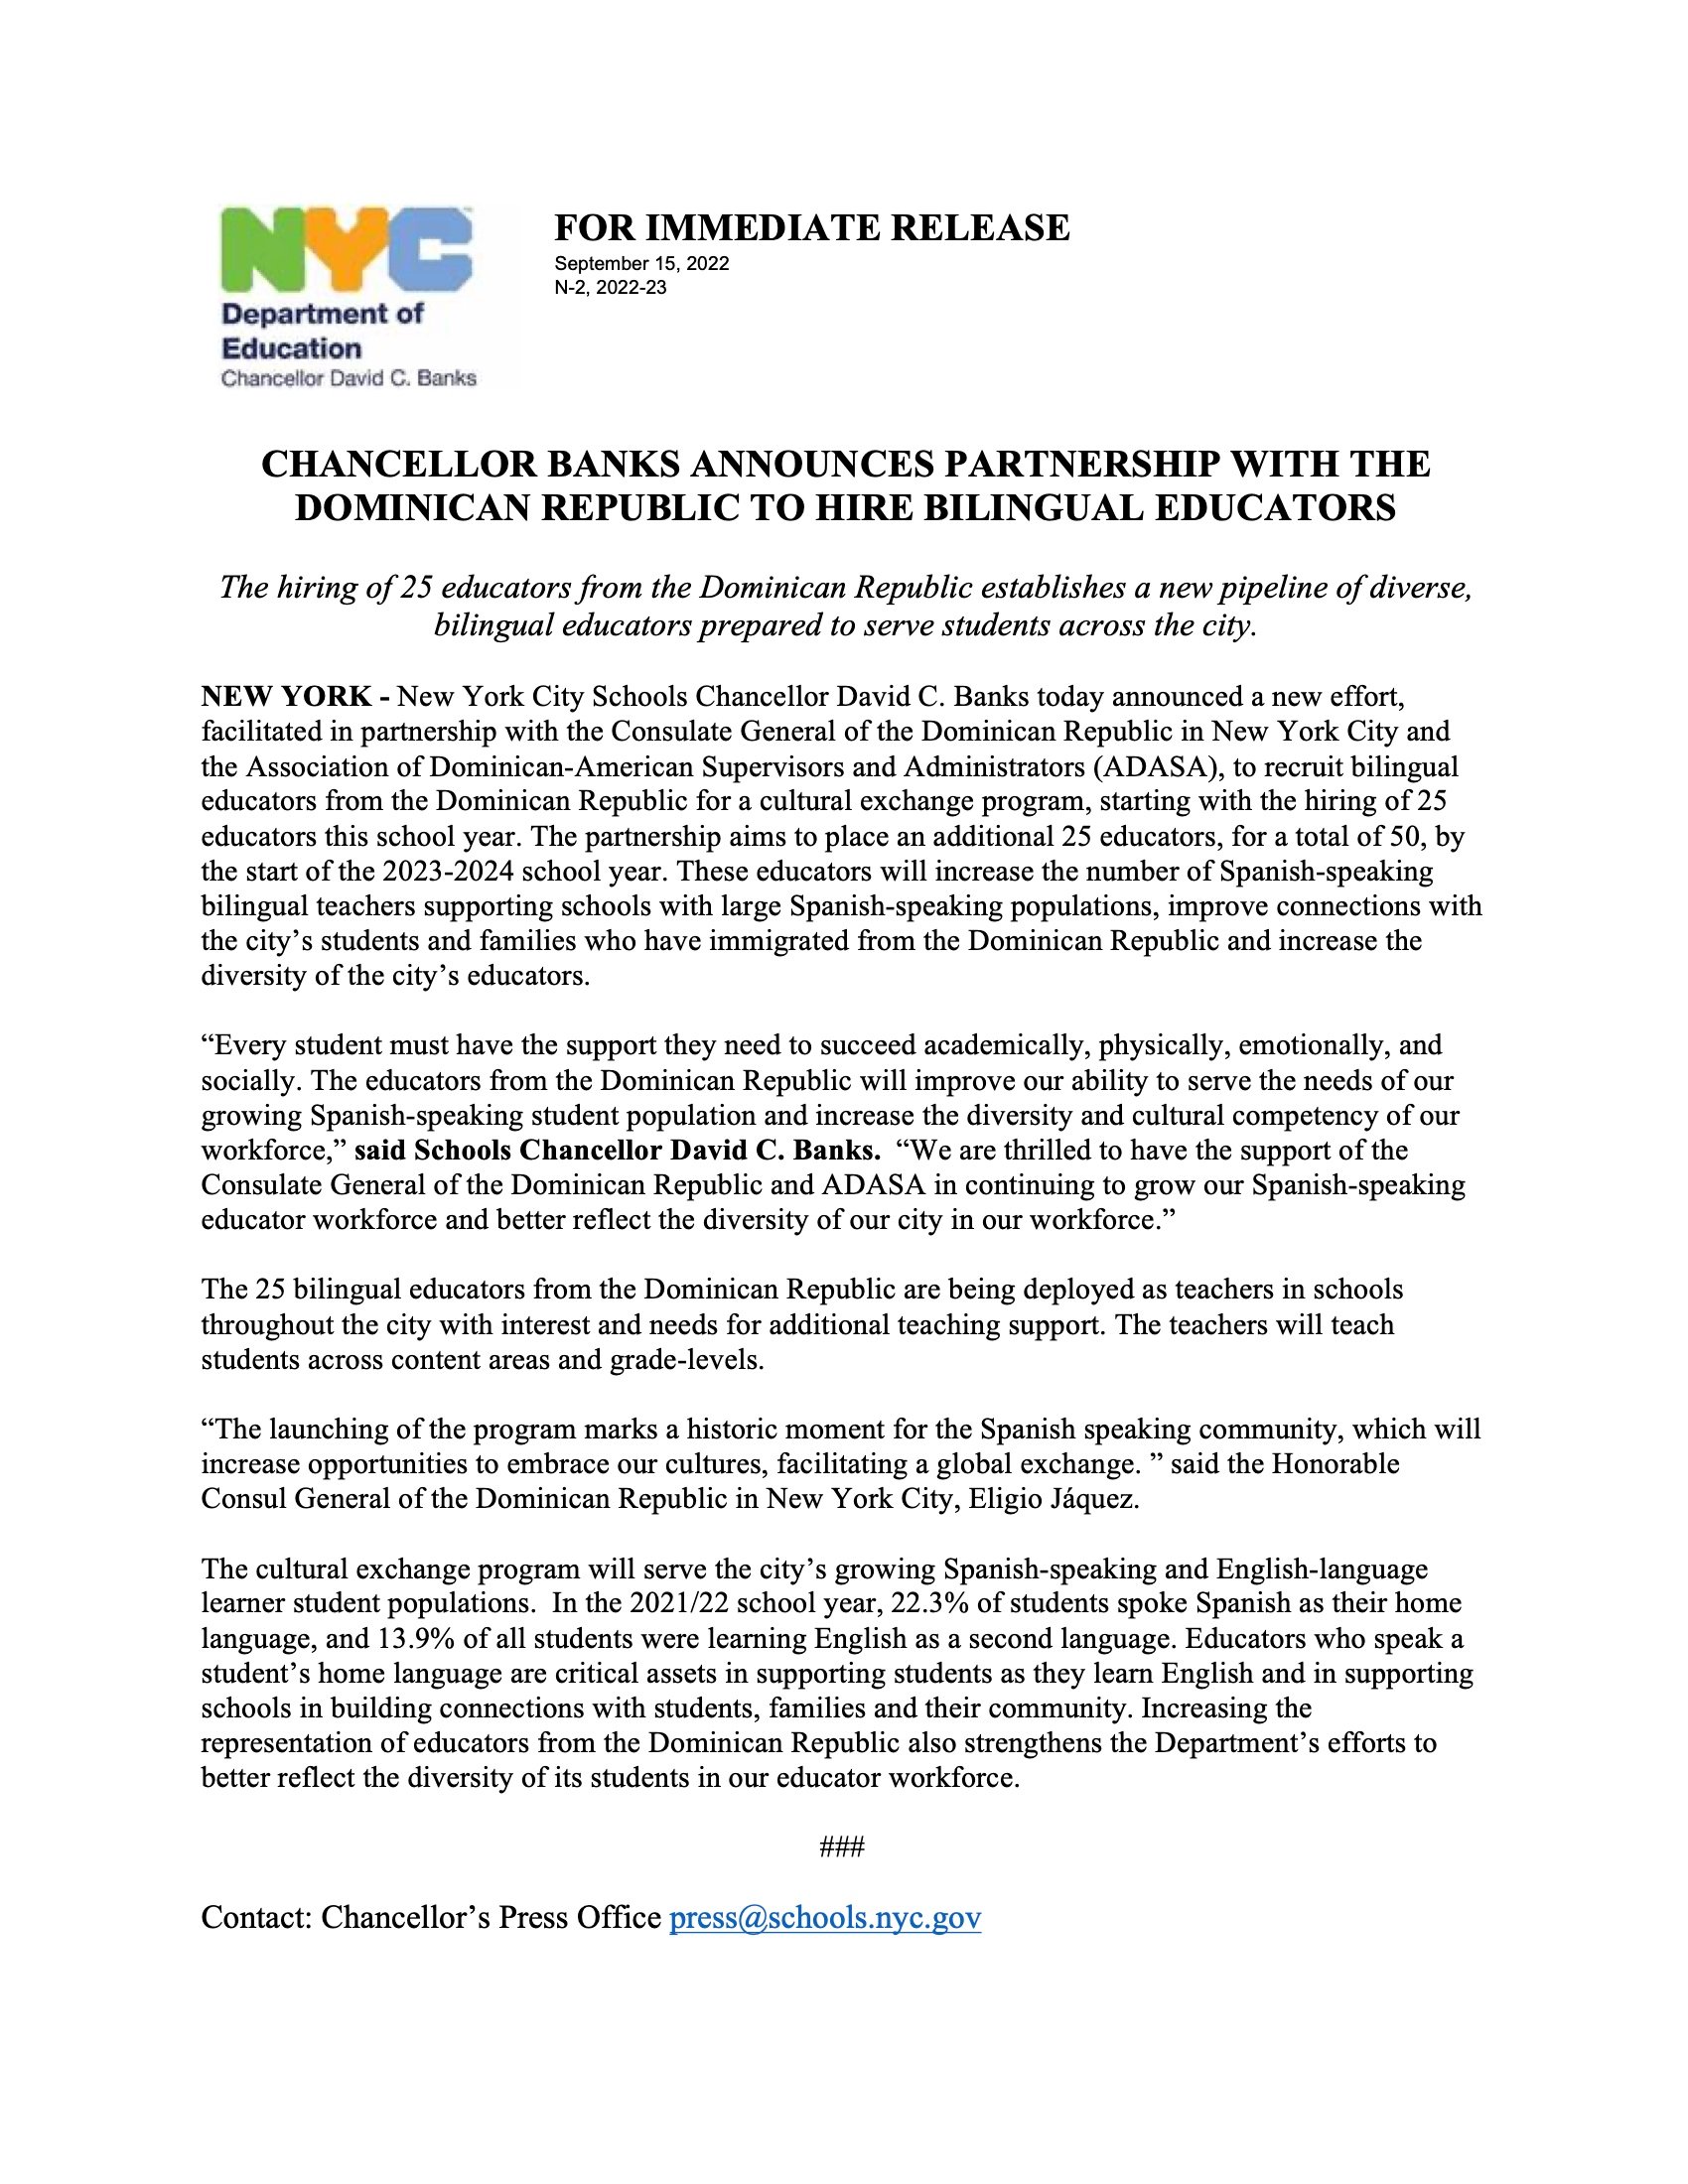 NYCDOE-Press+Release+N-2+2022-2023+%28Chancellor+Banks+Announces+Partnership+With+the+Dominican+Republic+to+Hire+Bilingual+Educators%29.jpg